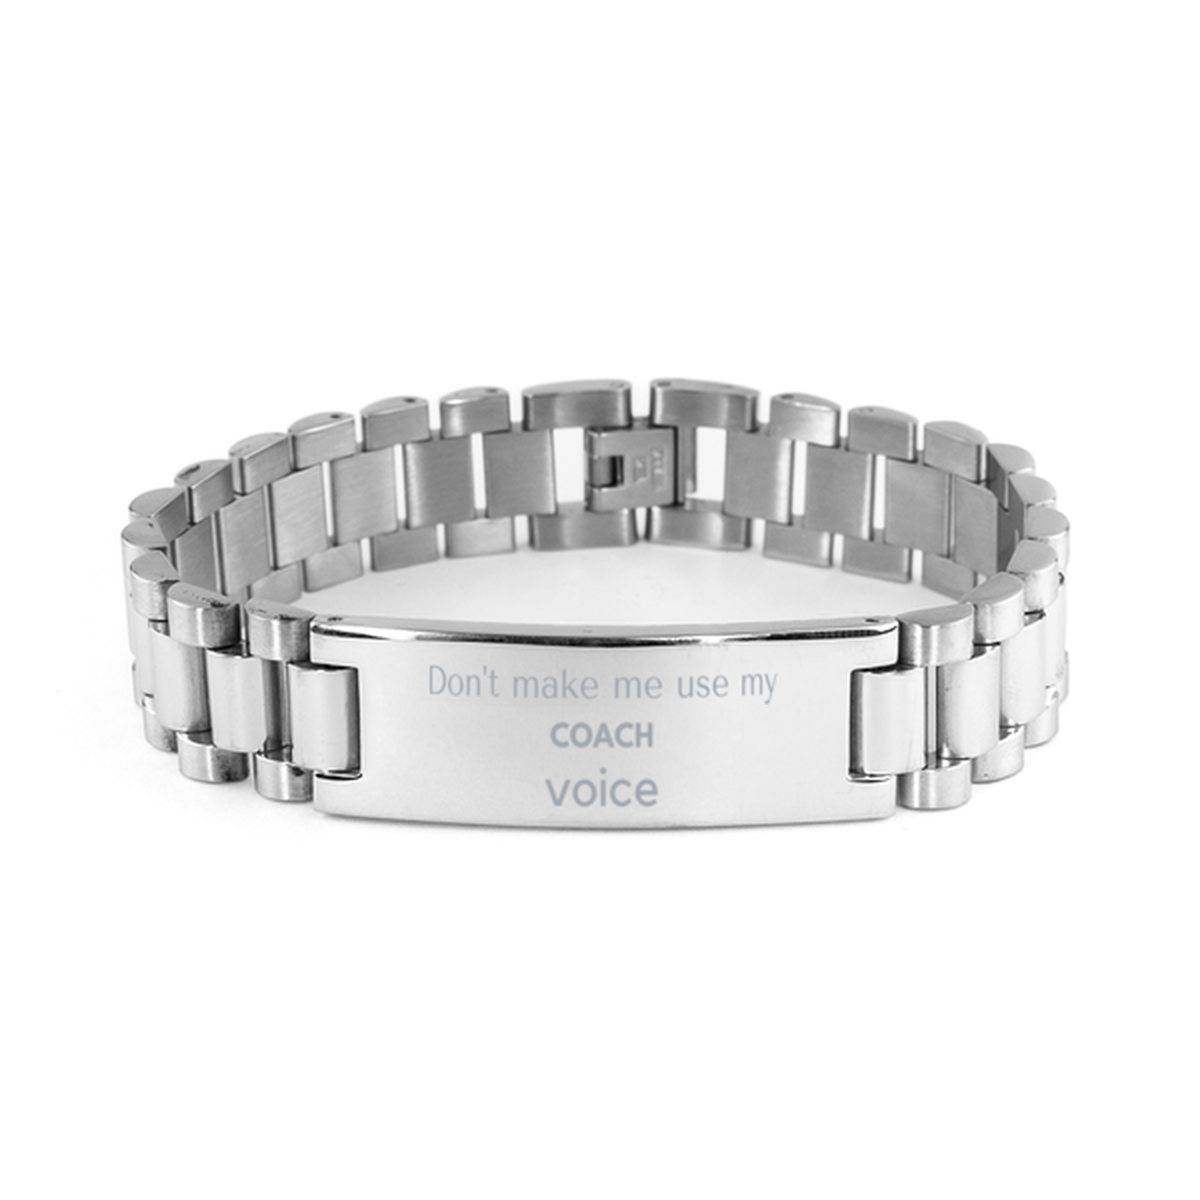 Don't make me use my Coach voice, Sarcasm Coach Gifts, Christmas Coach Ladder Stainless Steel Bracelet Birthday Unique Gifts For Coach Coworkers, Men, Women, Colleague, Friends